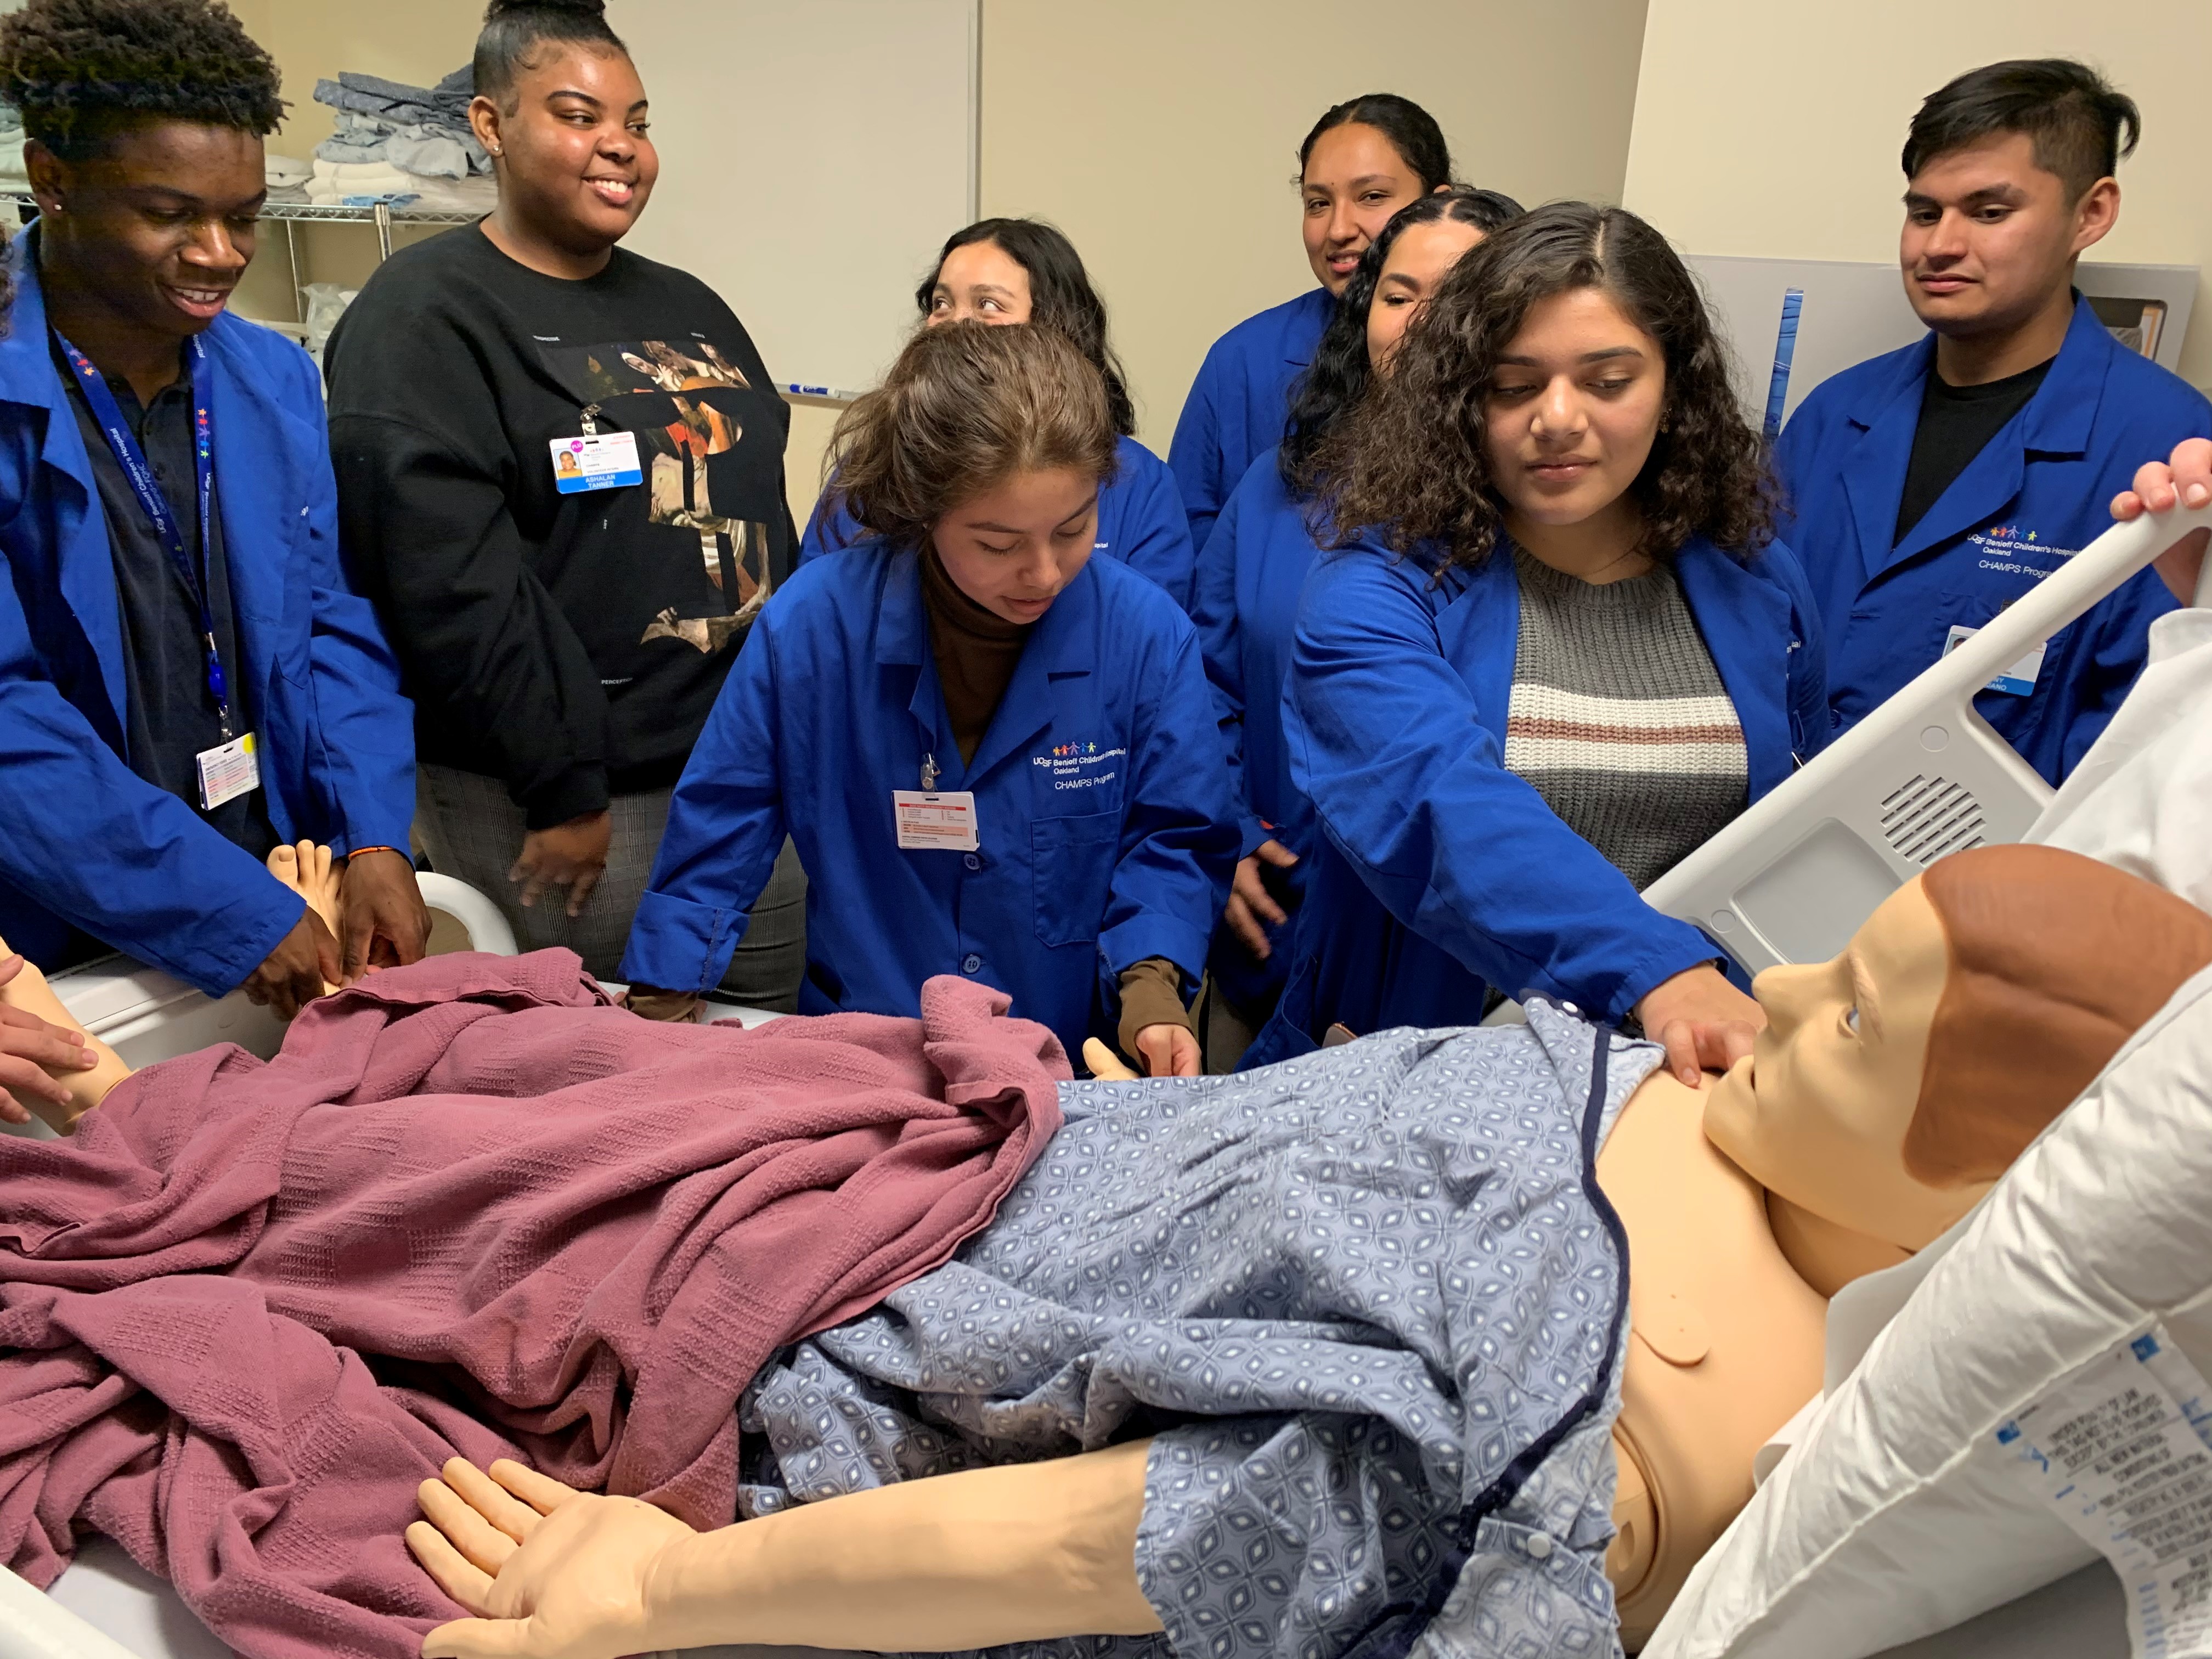 Group of 10 students leaning over the bed of a simulation patient doll.